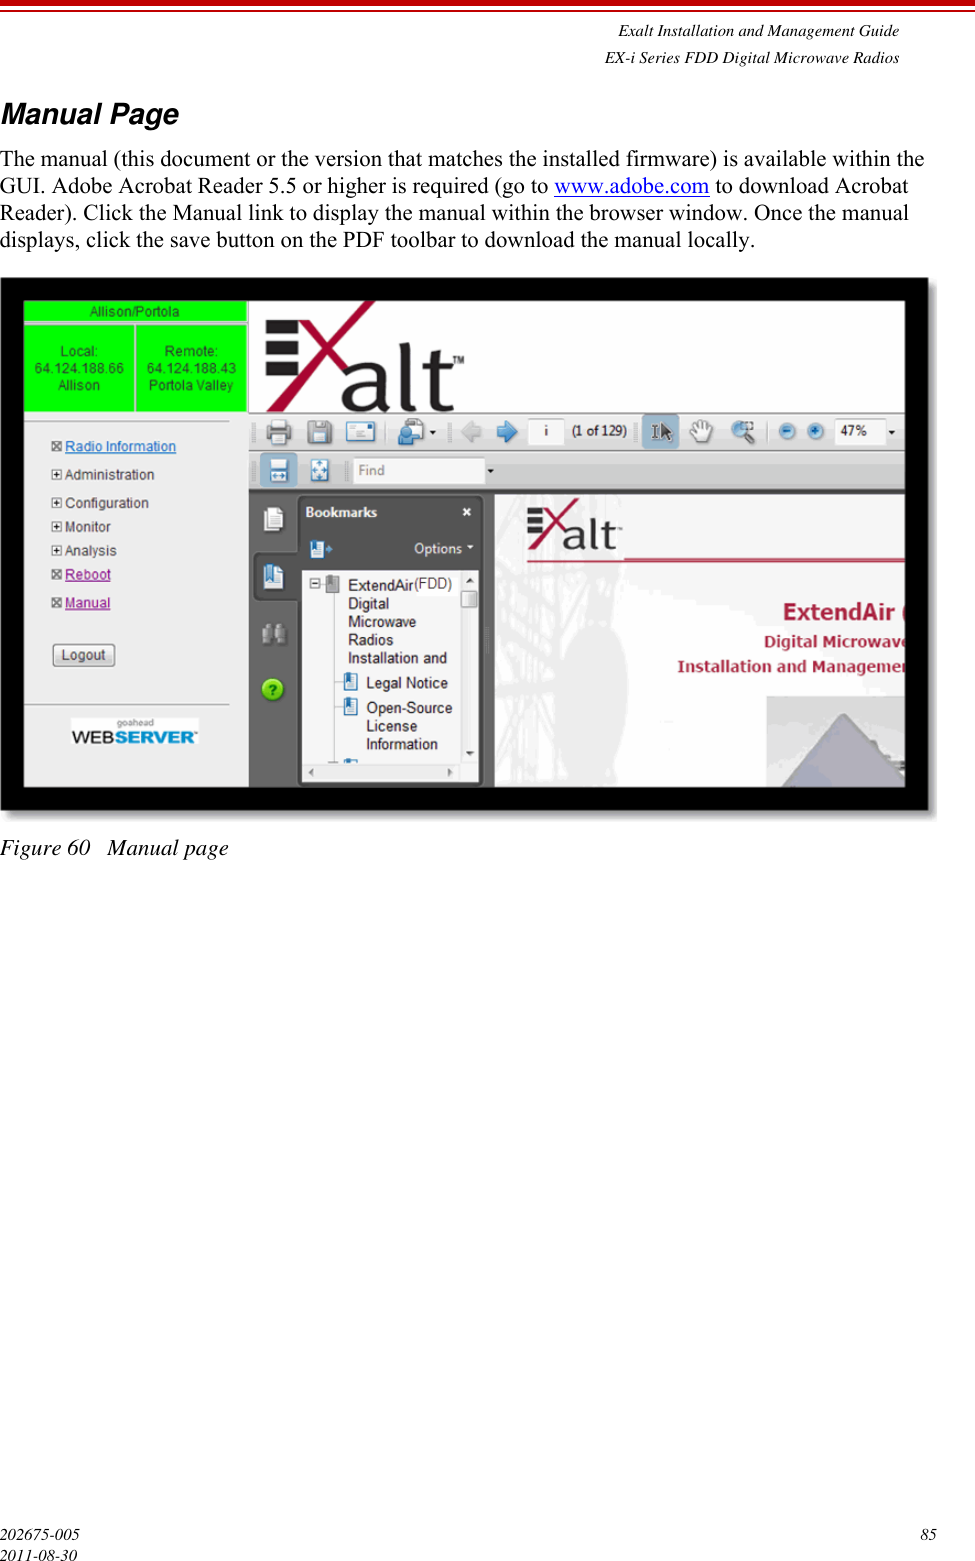 Exalt Installation and Management GuideEX-i Series FDD Digital Microwave Radios202675-005 852011-08-30Manual PageThe manual (this document or the version that matches the installed firmware) is available within the GUI. Adobe Acrobat Reader 5.5 or higher is required (go to www.adobe.com to download Acrobat Reader). Click the Manual link to display the manual within the browser window. Once the manual displays, click the save button on the PDF toolbar to download the manual locally.Figure 60   Manual page